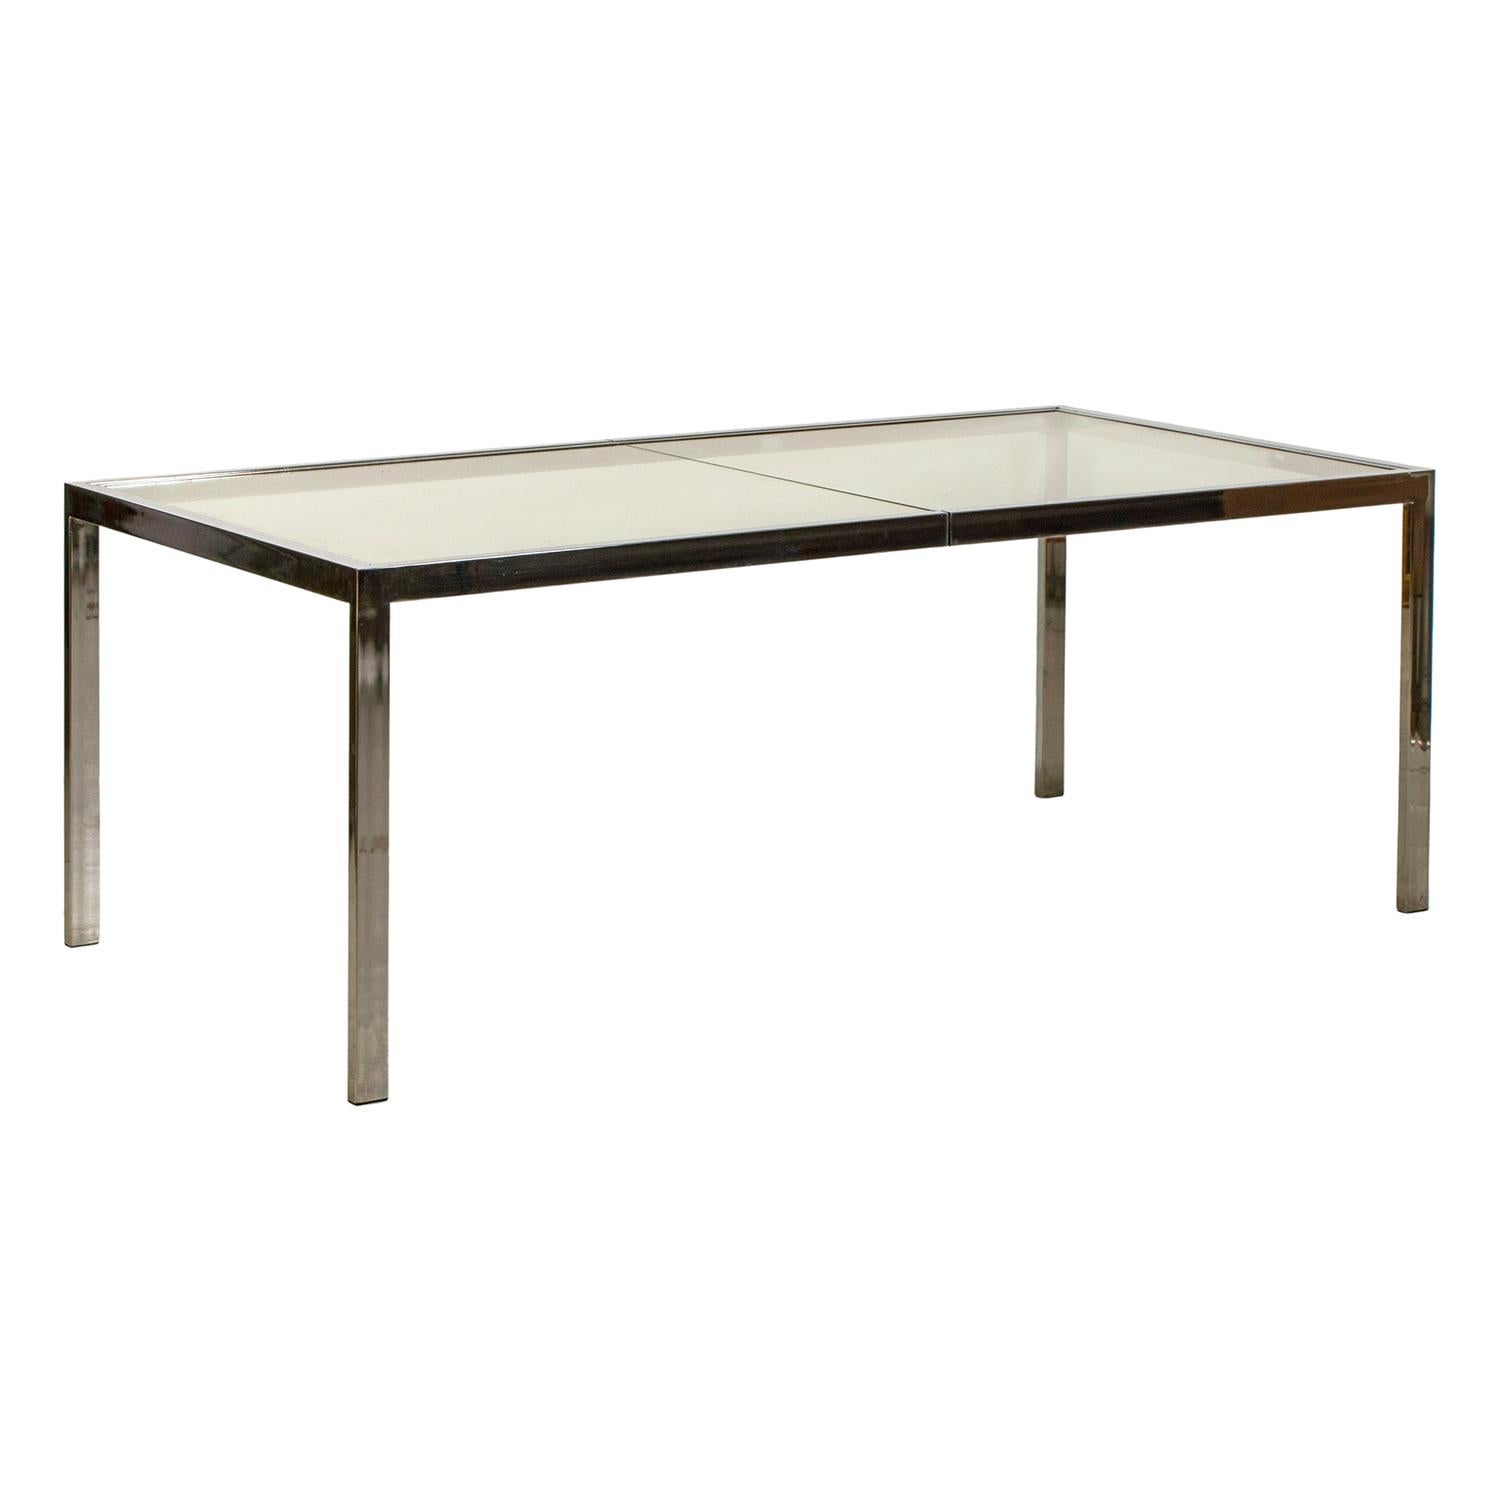 A large, vintage Mid-Century Modern American extendable dining table made of handcrafted chrome, designed by Milo Baughman in good condition. The table comes with two metal and glass plate extension; the glass top is supported by metal fittings.